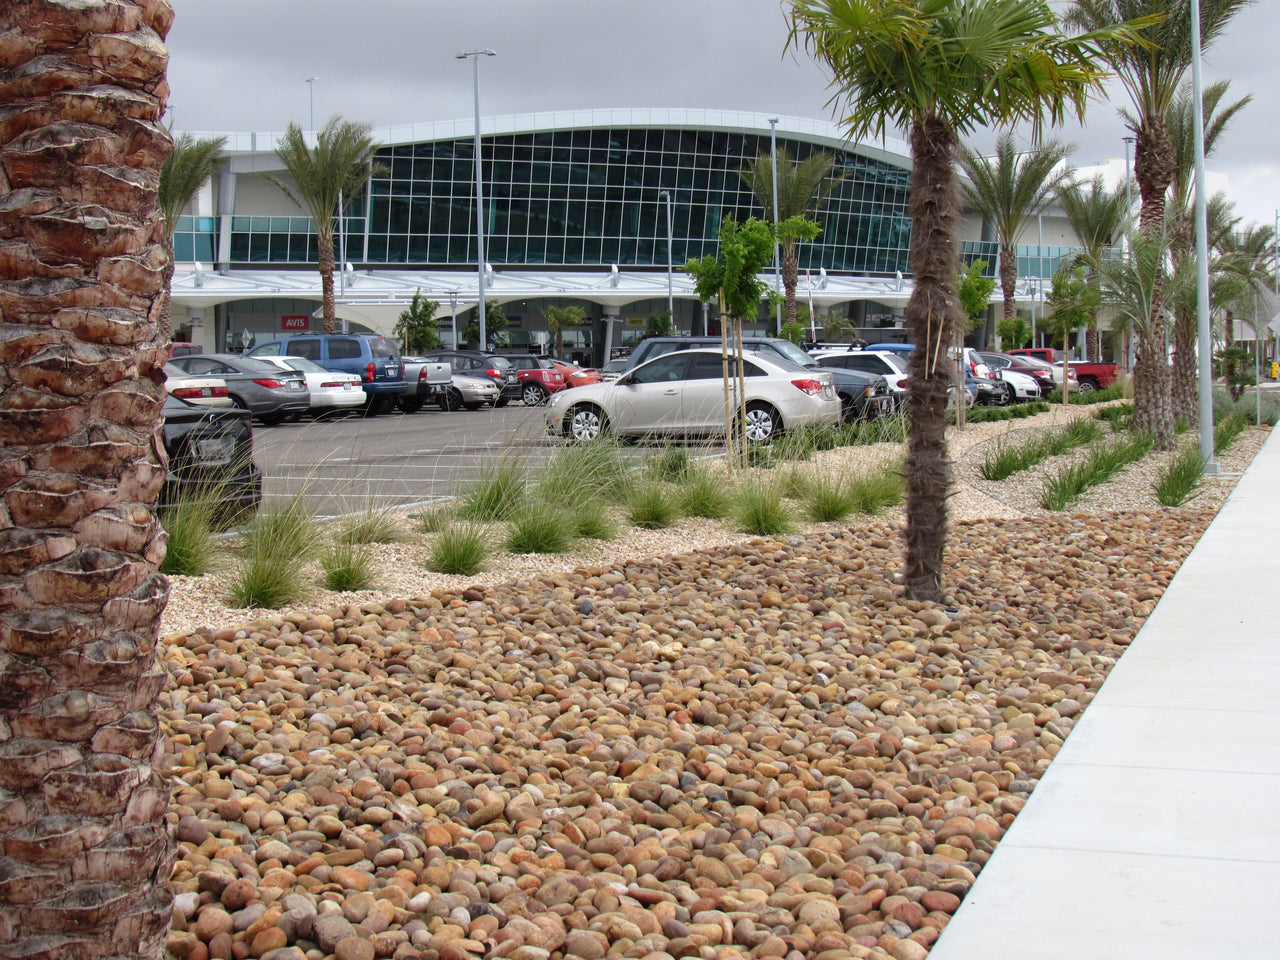 Decorative stones in a ground cover application in a parking lot application